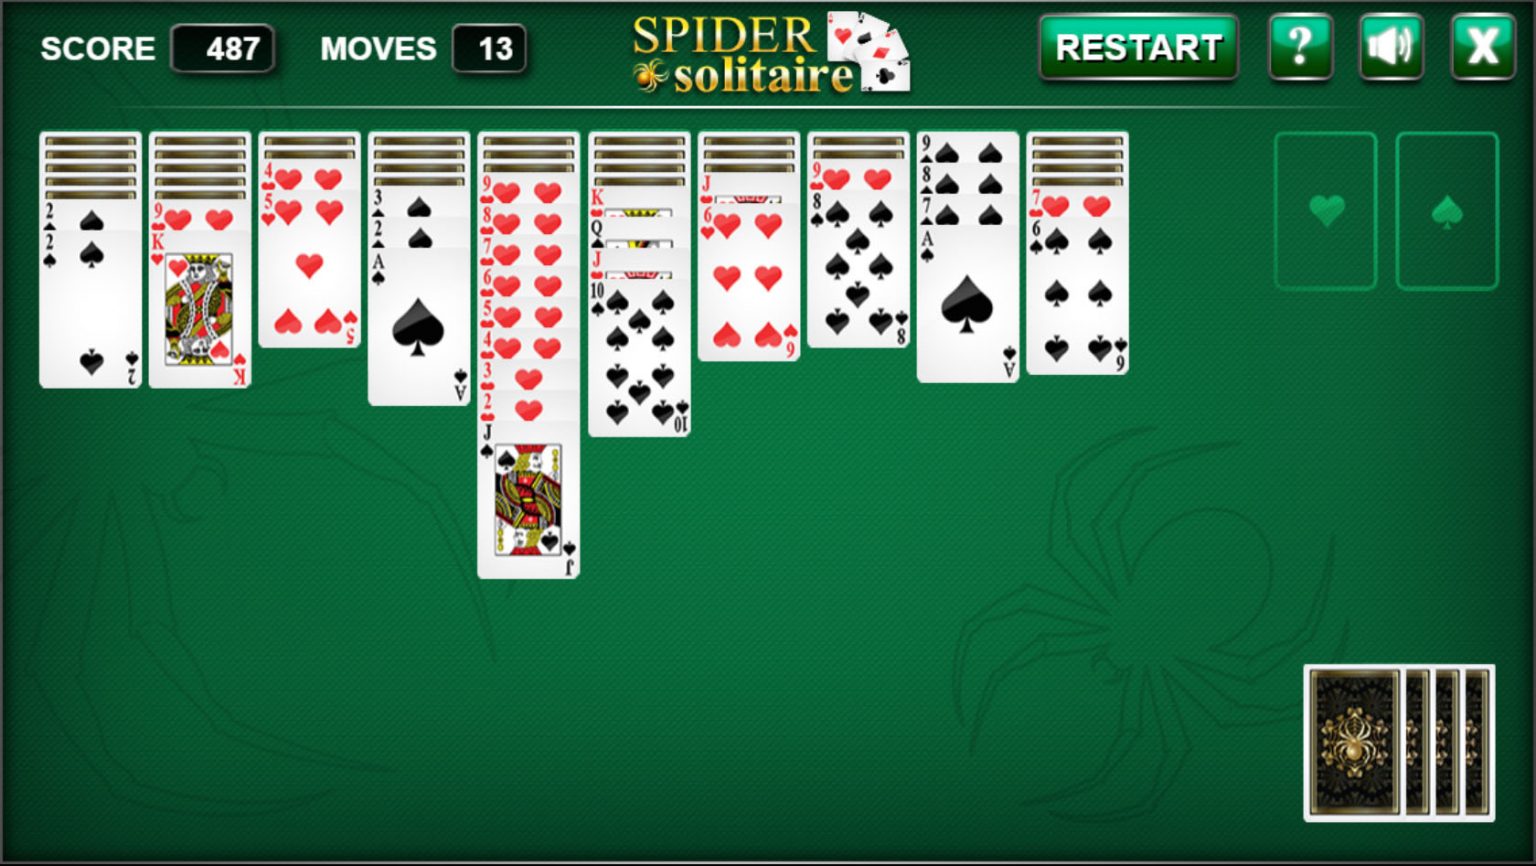 download spider solitaire for windows 7